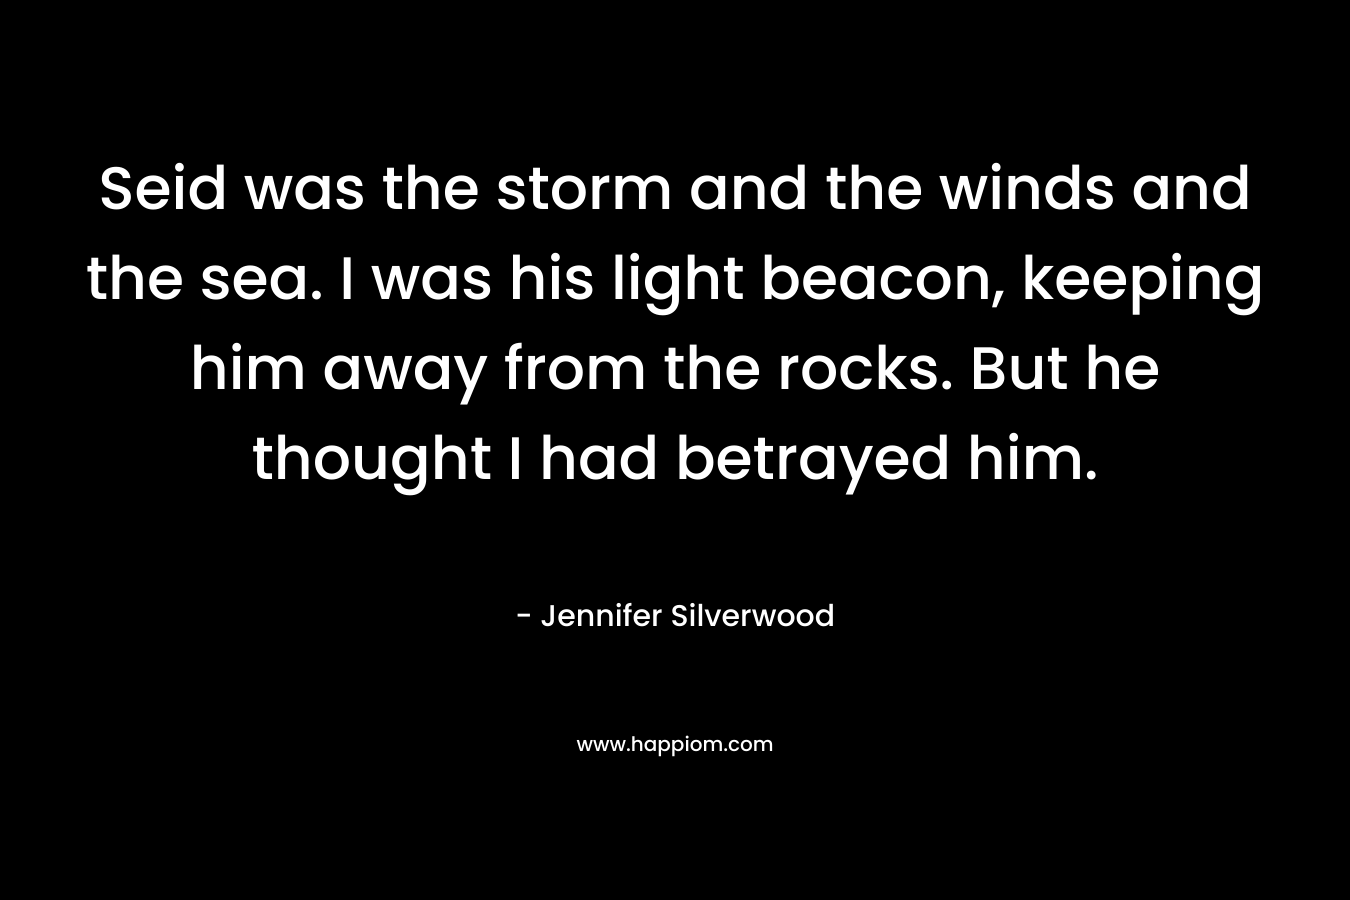 Seid was the storm and the winds and the sea. I was his light beacon, keeping him away from the rocks. But he thought I had betrayed him.